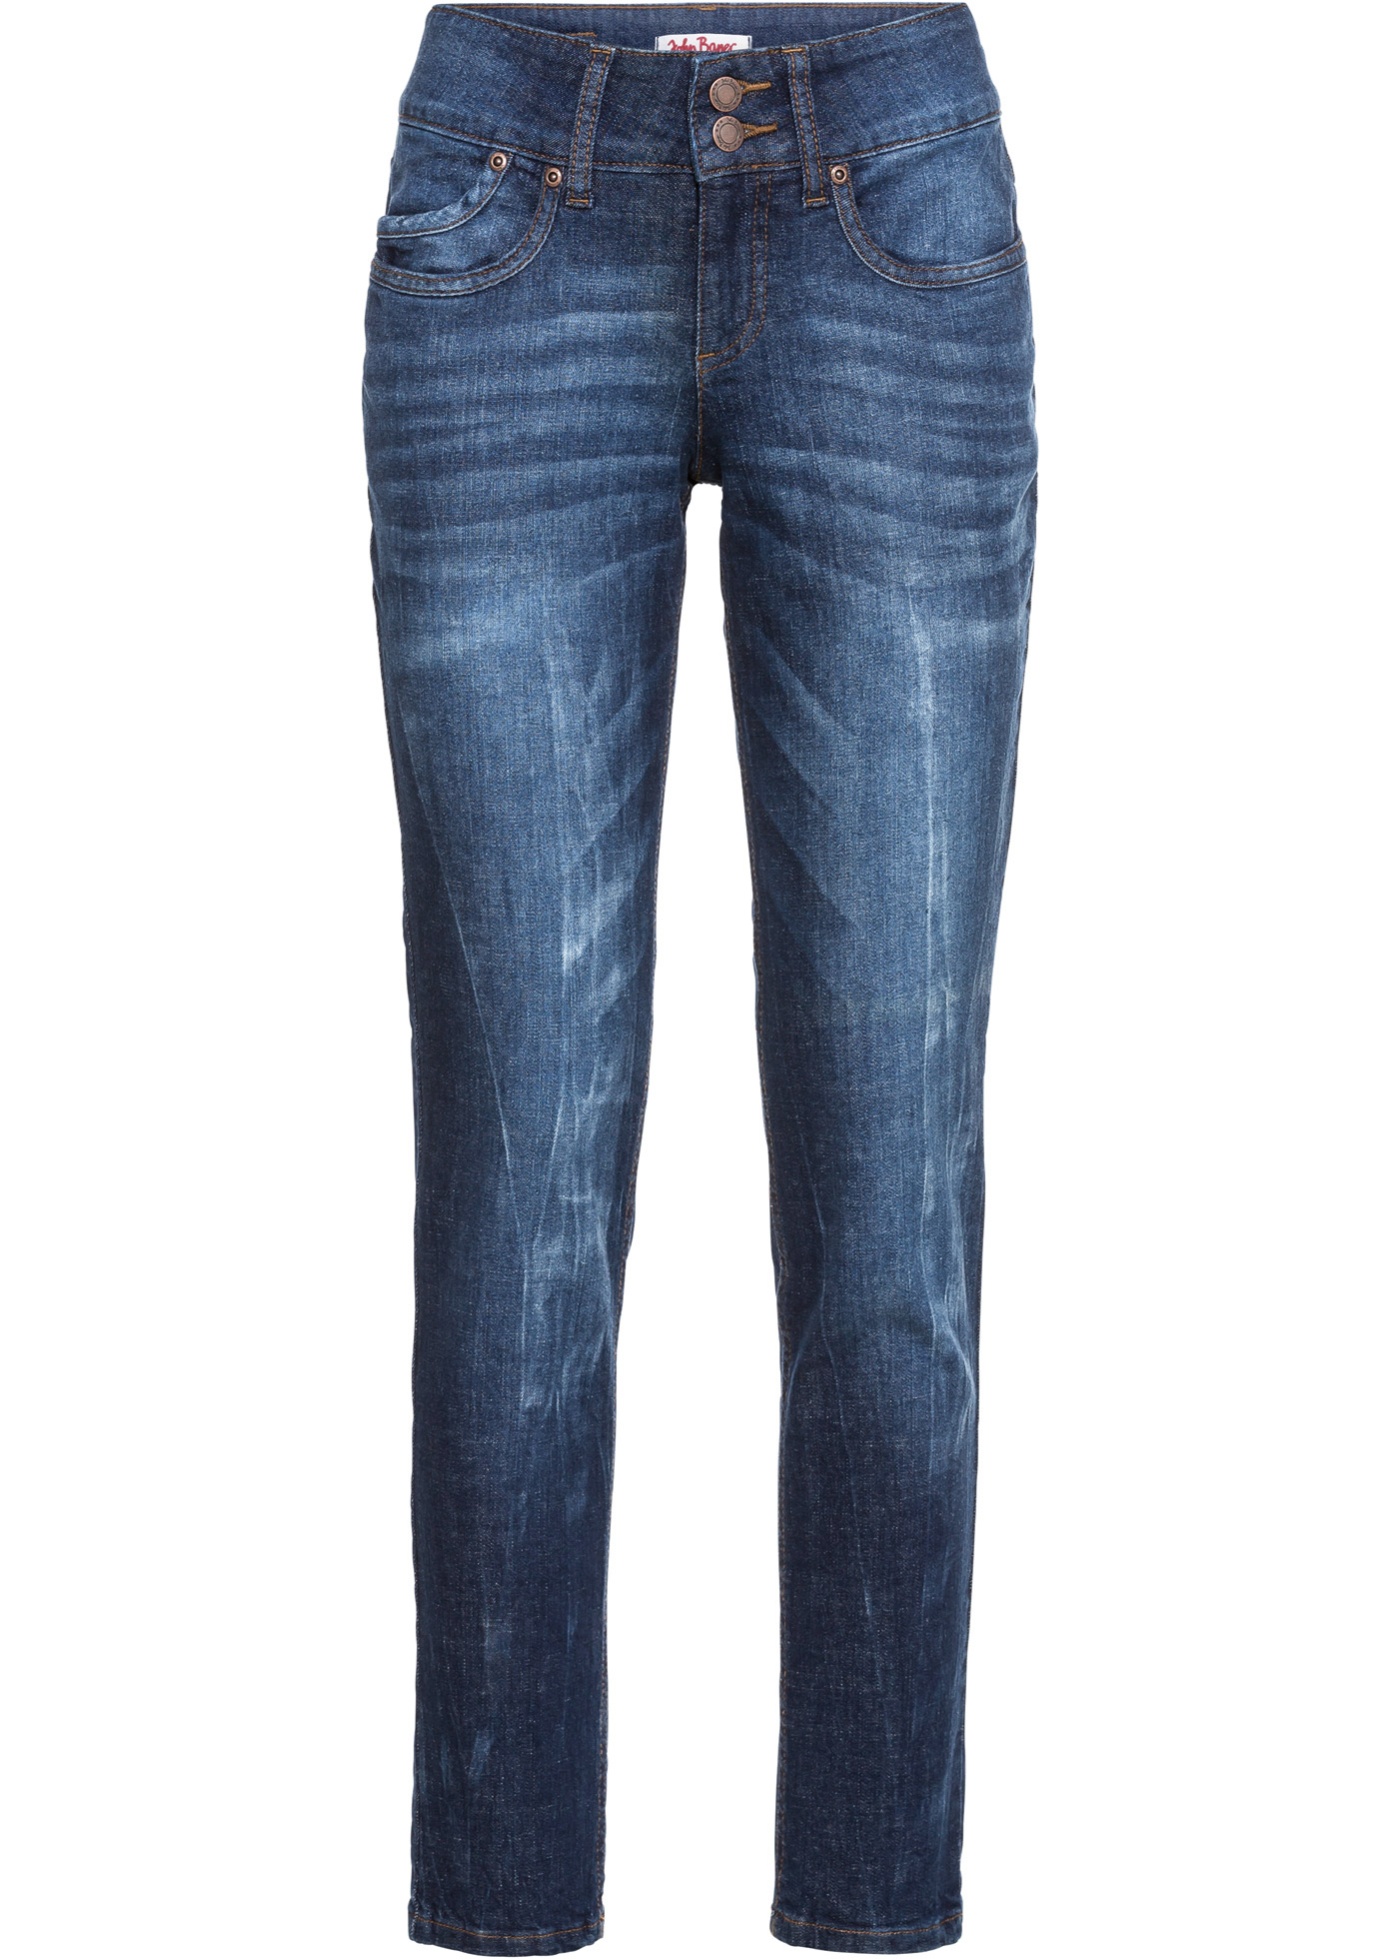 Jean extensible, CLASSIC